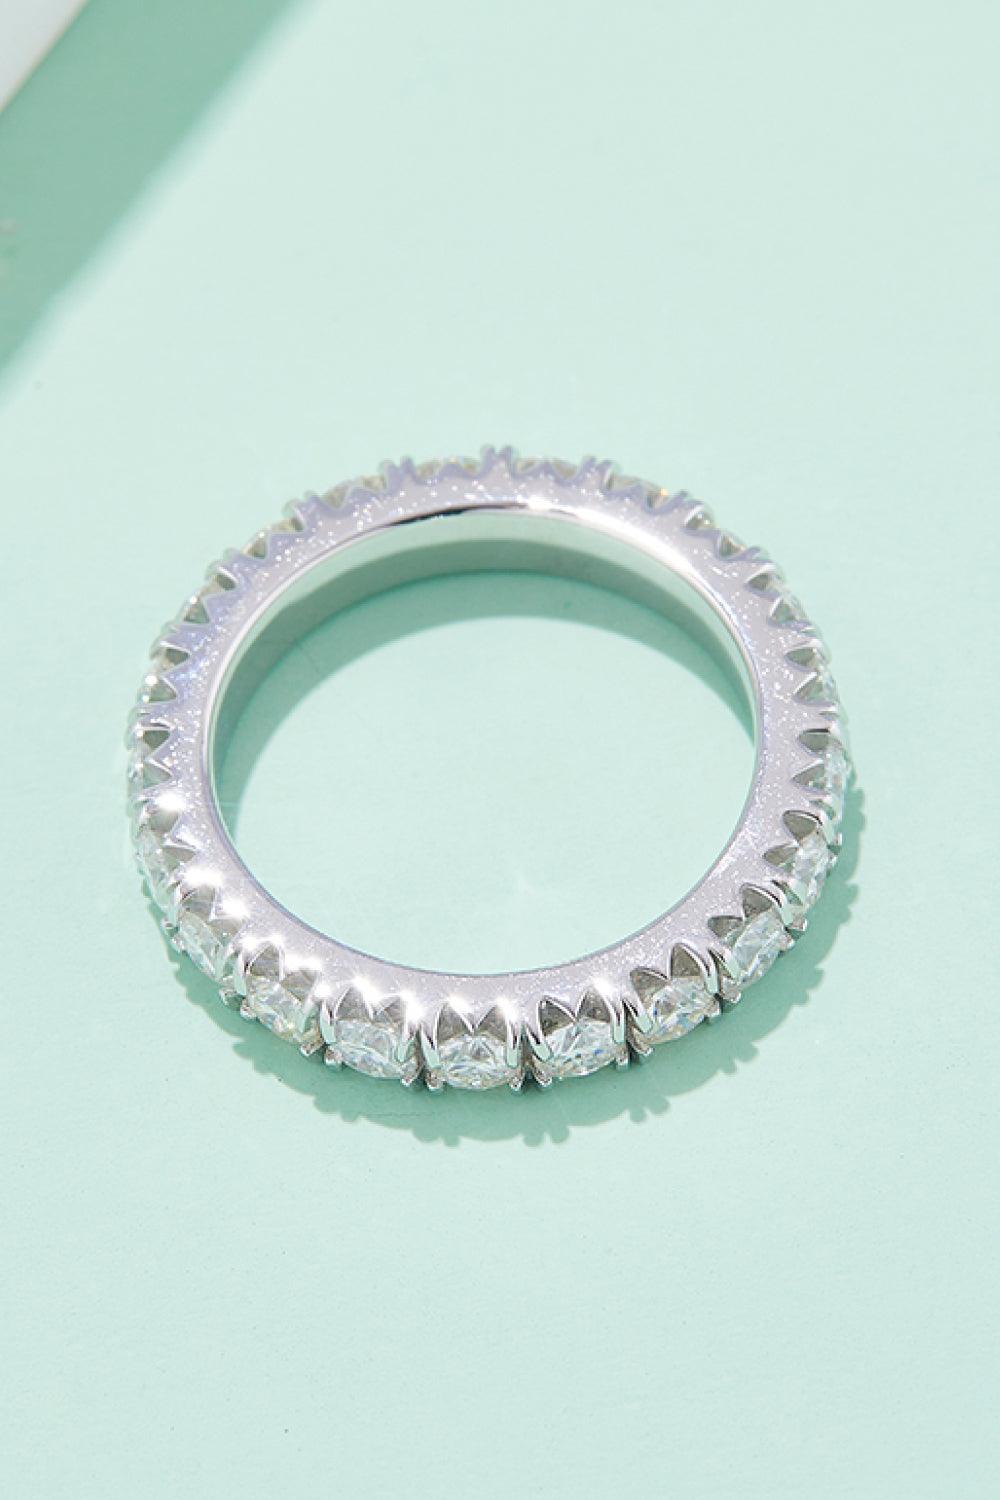 Adored 2.3 Carat Moissanite 925 Sterling Silver Eternity Ring - Ring